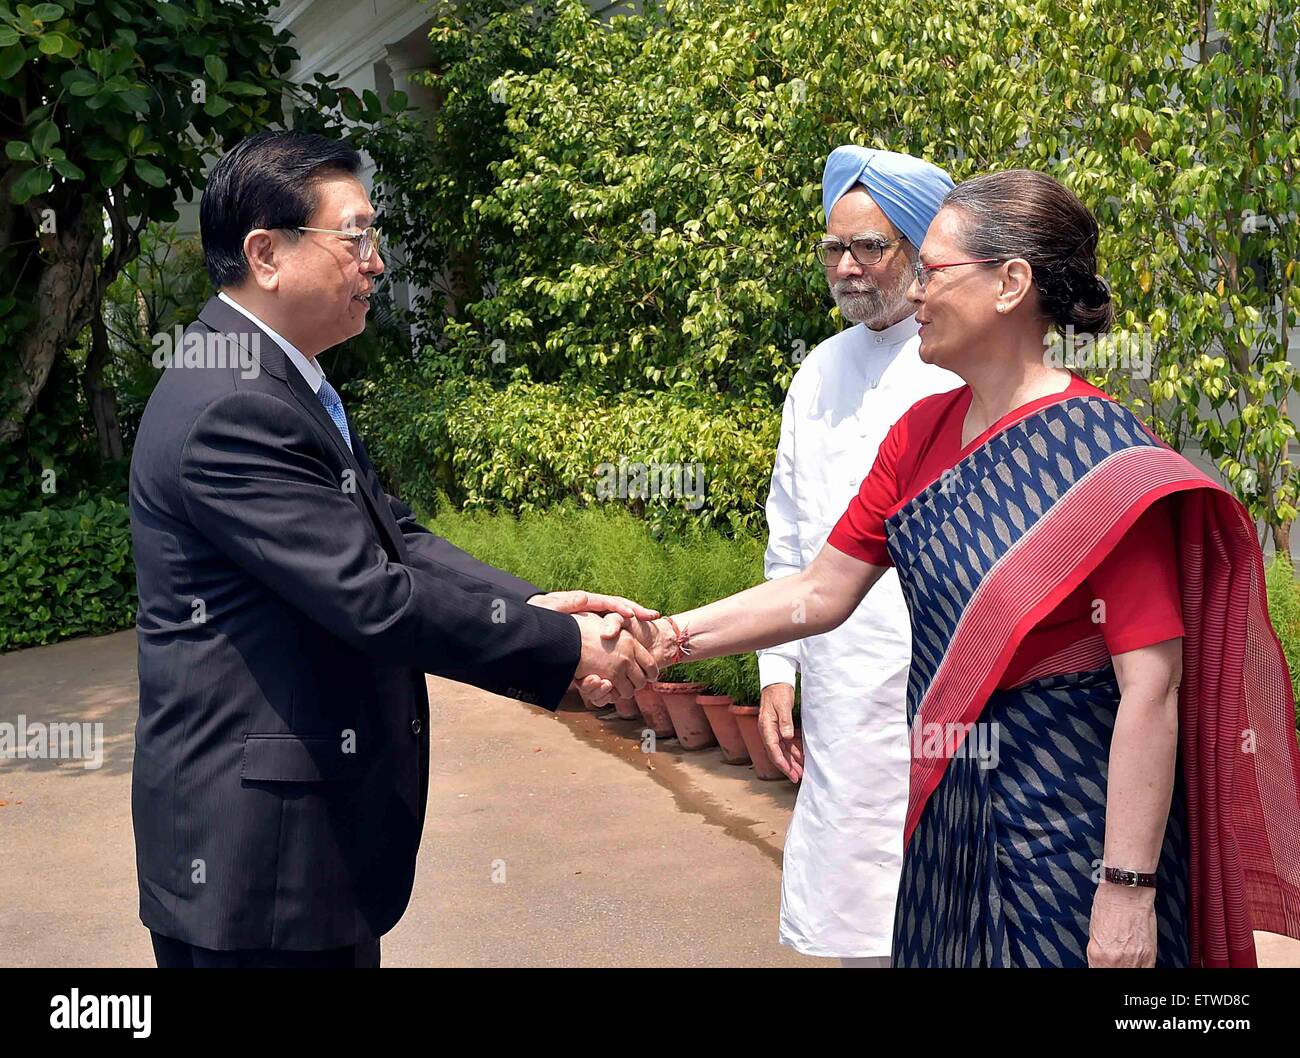 New Delhi, India. 16th June, 2015. Zhang Dejiang (L), chairman of the Standing Committee of China's National People's Congress, meets with Sonia Gandhi (1st R), president of the Indian National Congress Party, and former Indian Prime Minister Manmohan Singh (2nd R) in New Delhi, India, June 16, 2015. © Li Tao/Xinhua/Alamy Live News Stock Photo